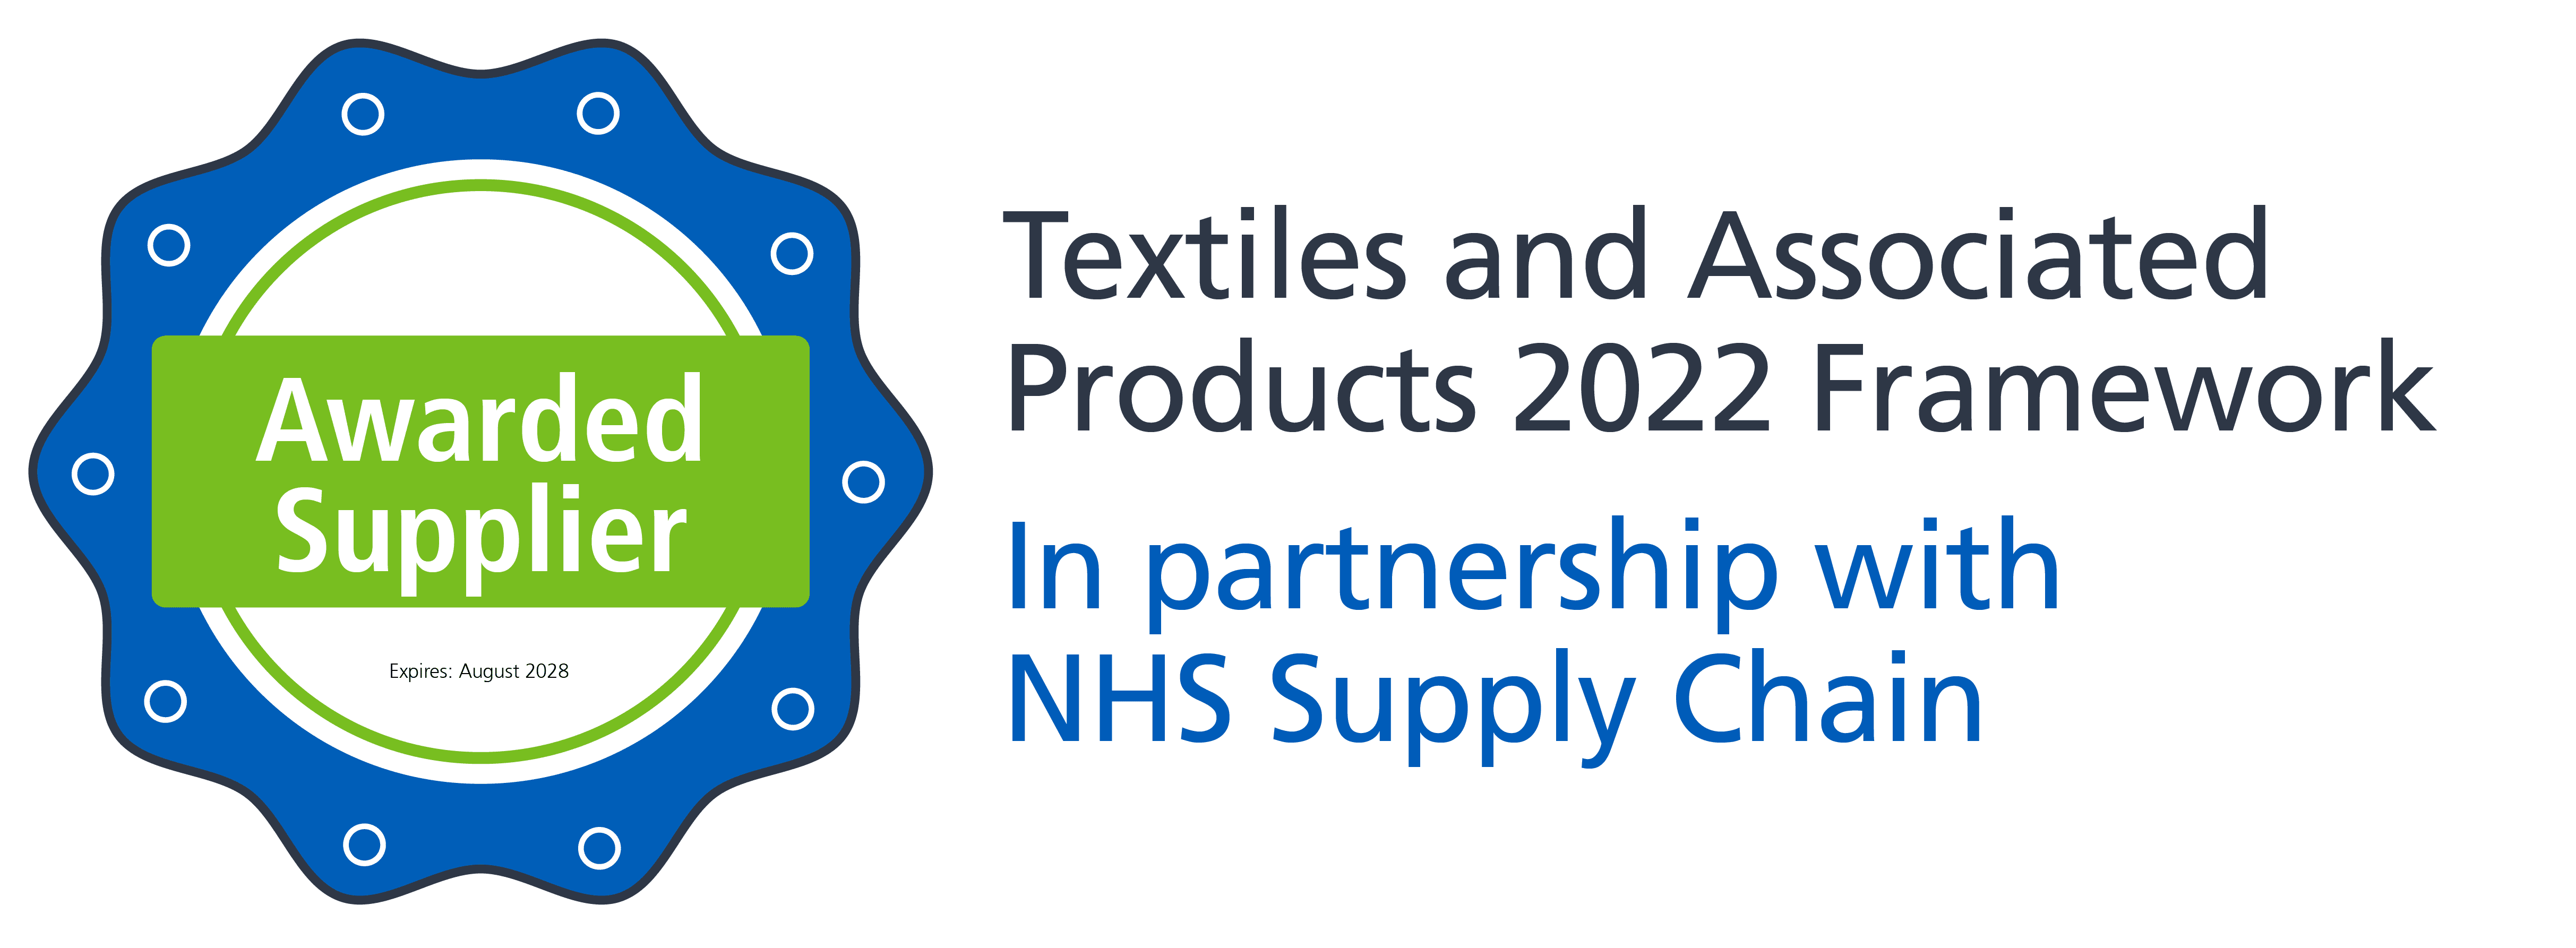 Textiles and Associated Products 2022 Framework Awarded Supplier